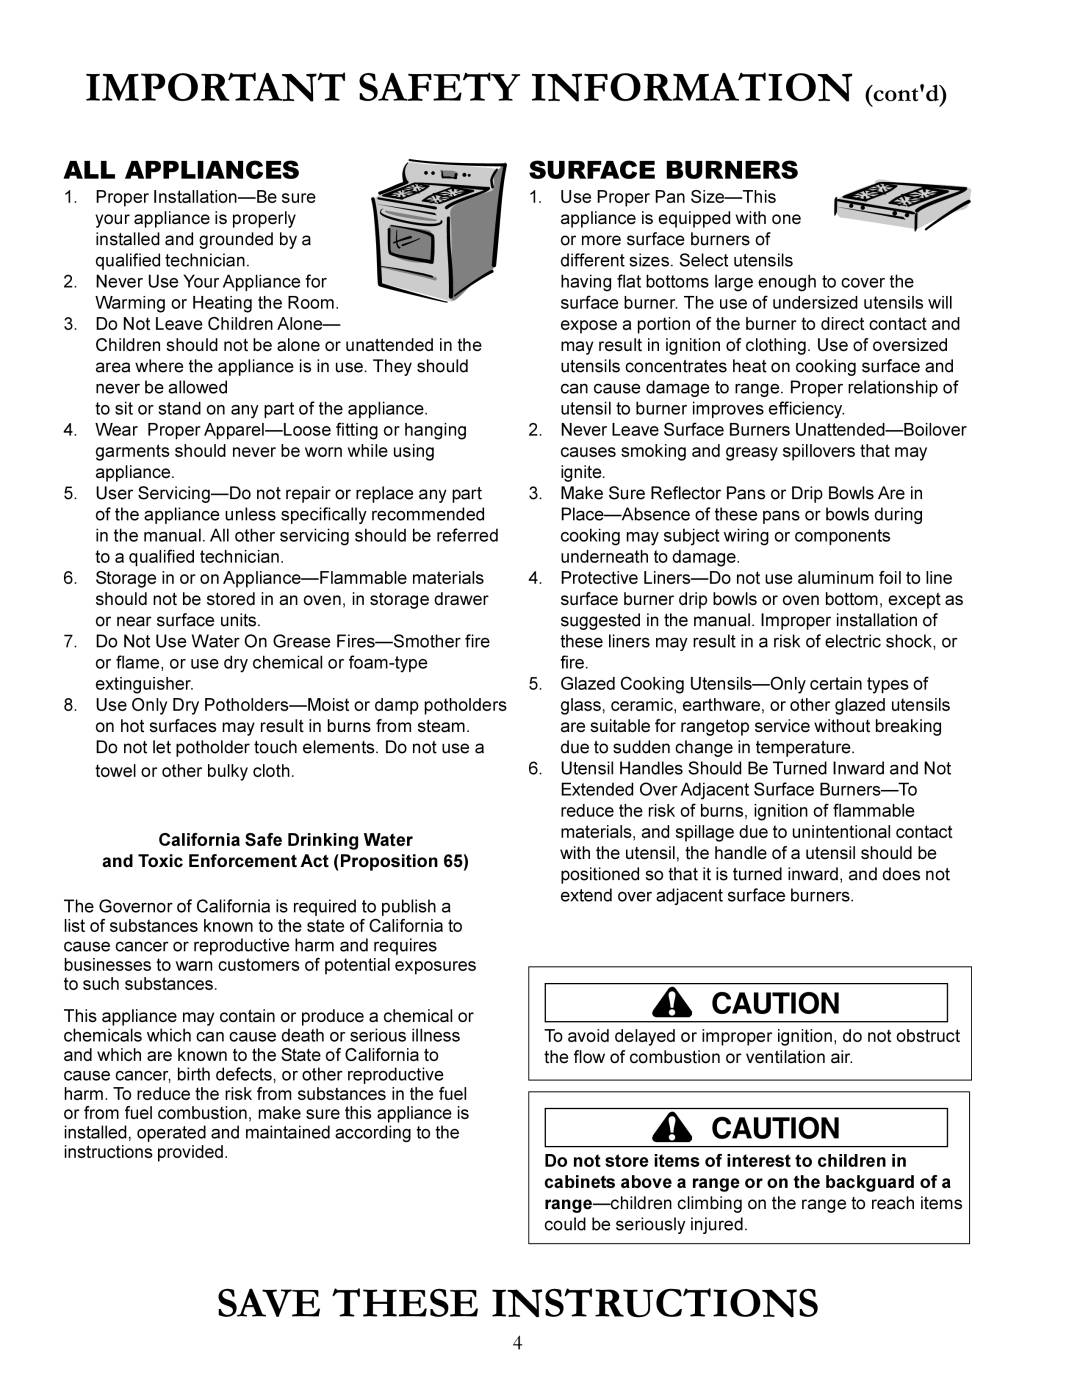 Amana The Big Oven Gas Range IMPORTANT SAFETY INFORMATION contd, All Appliances, Surface Burners, Save These Instructions 